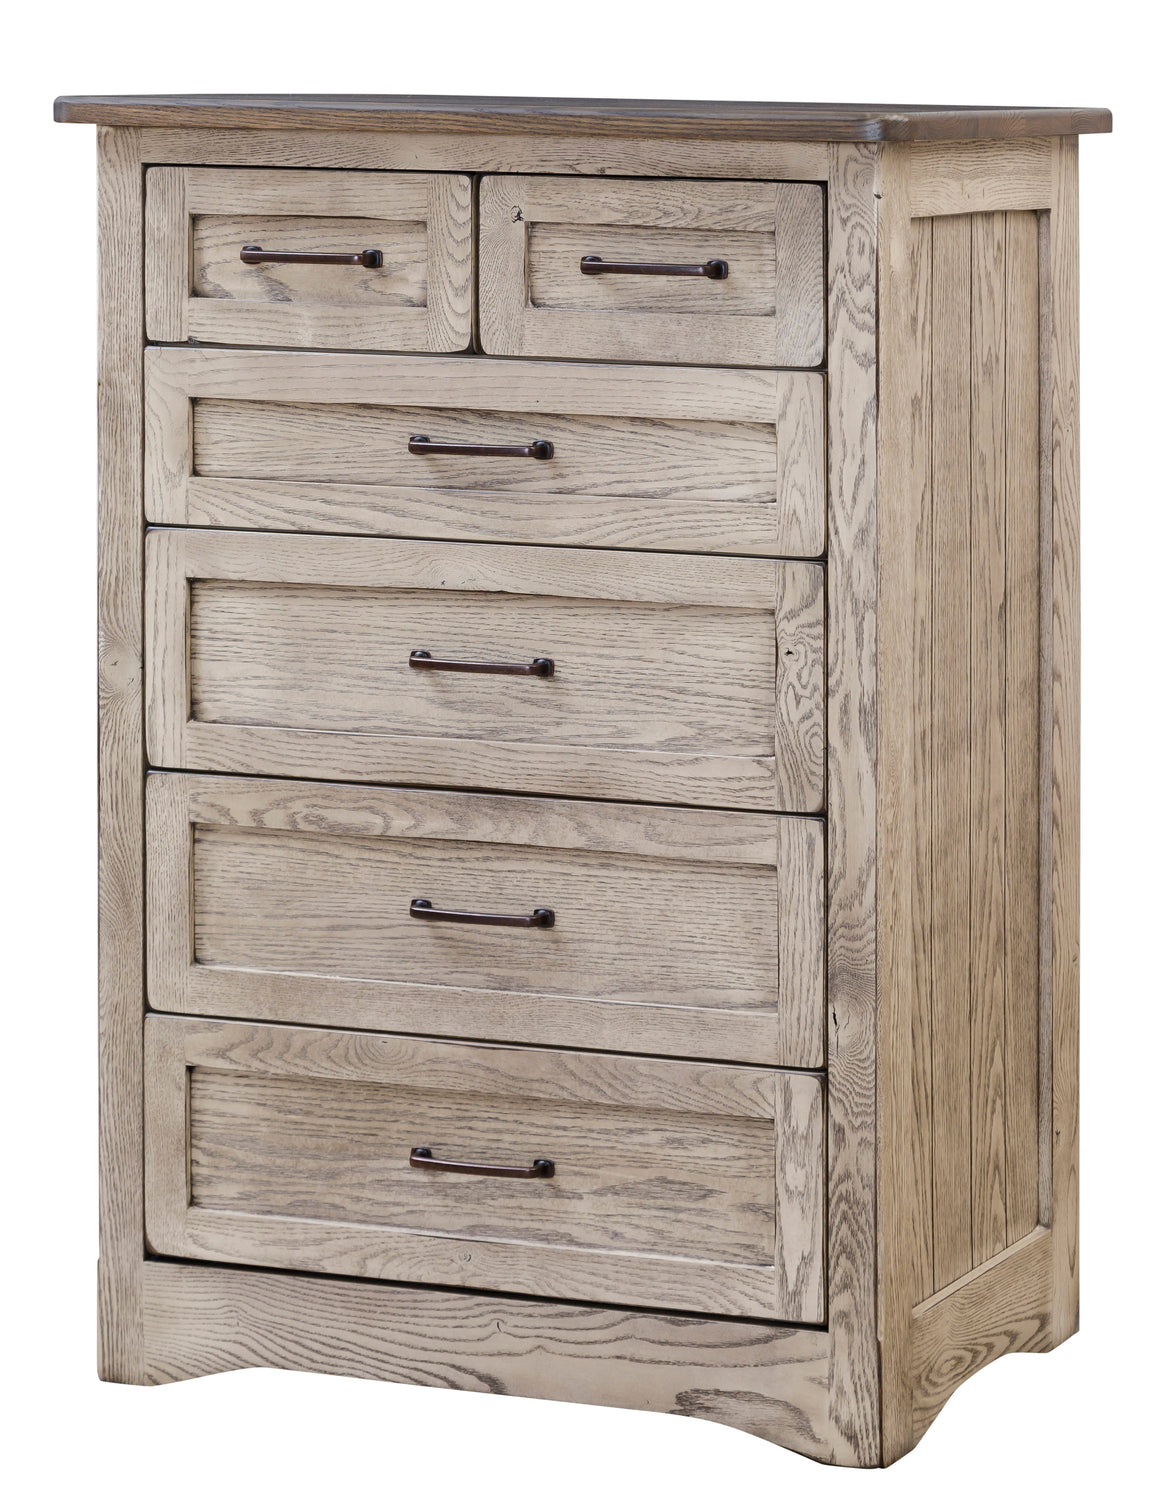 Farmstead Chest of Drawers (V16 #763)